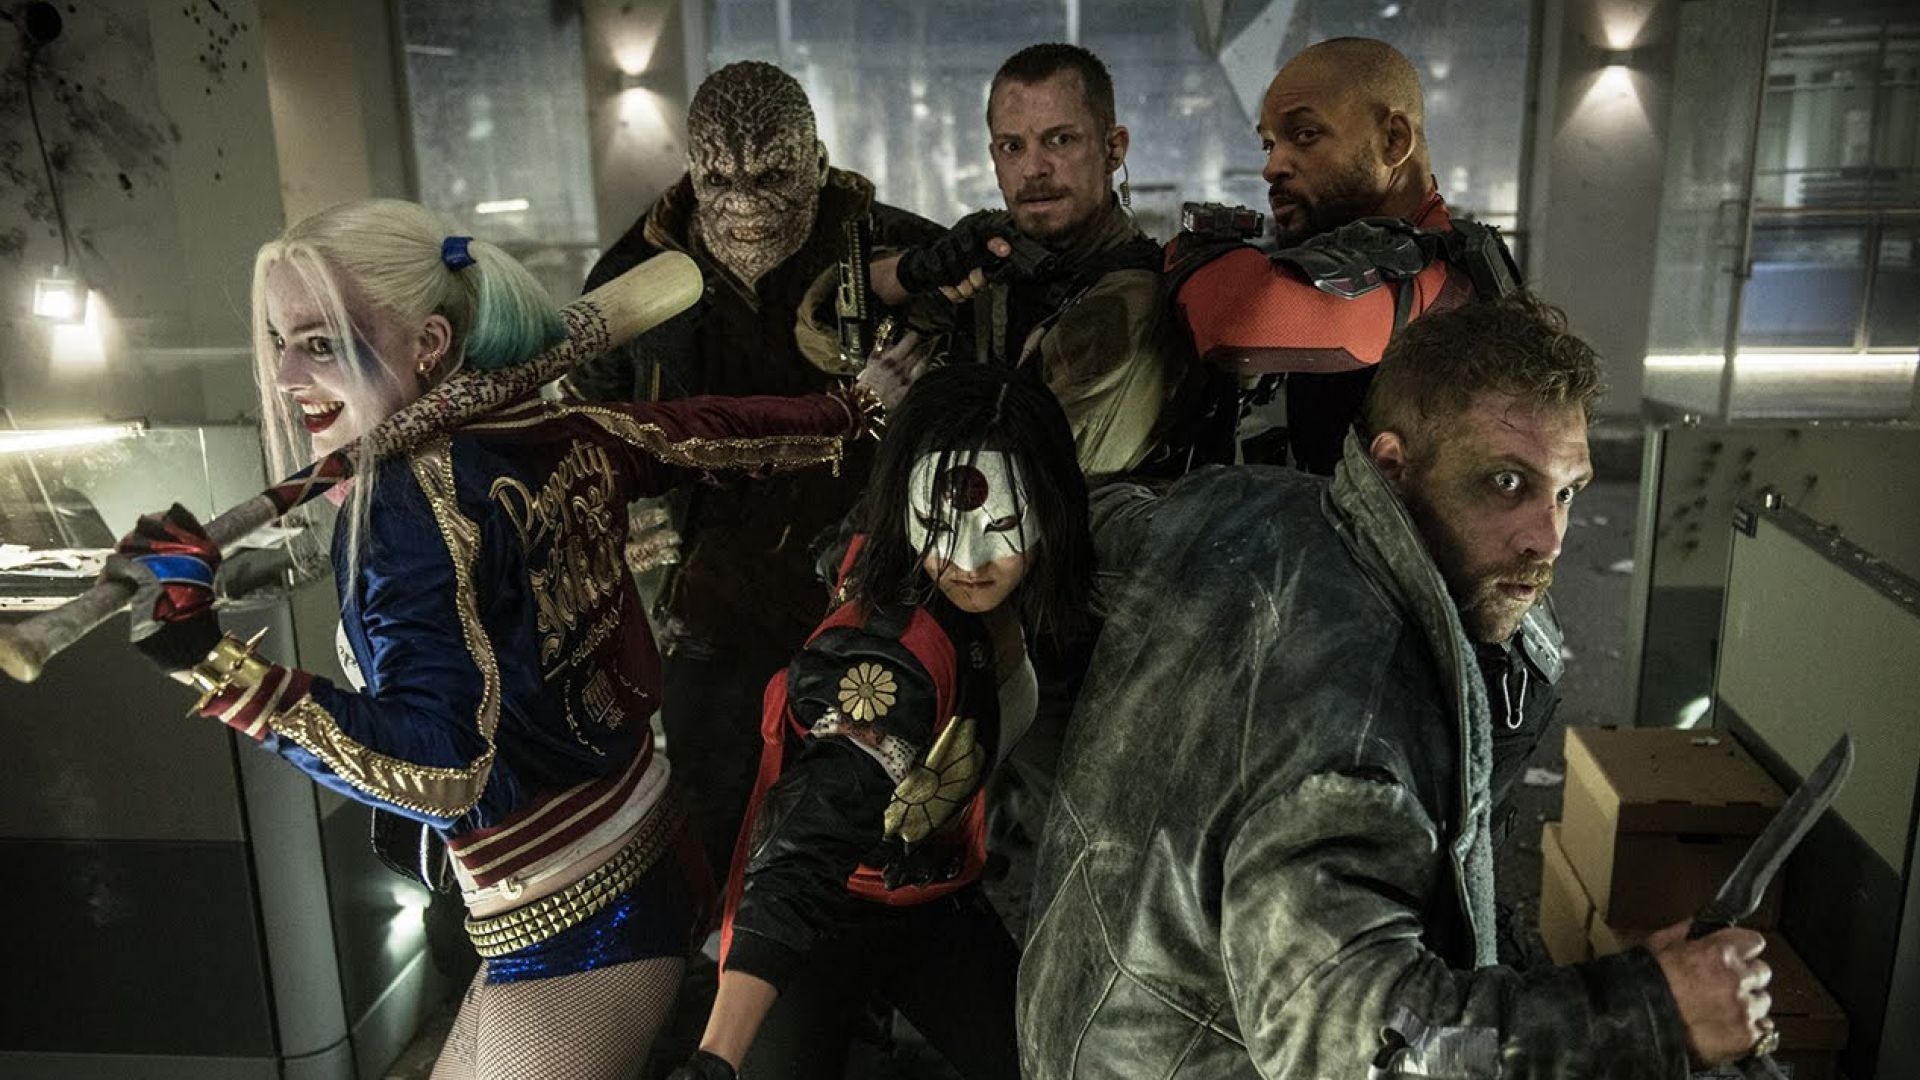 Brand new trailer for Suicide Squad has premiered! Watch her